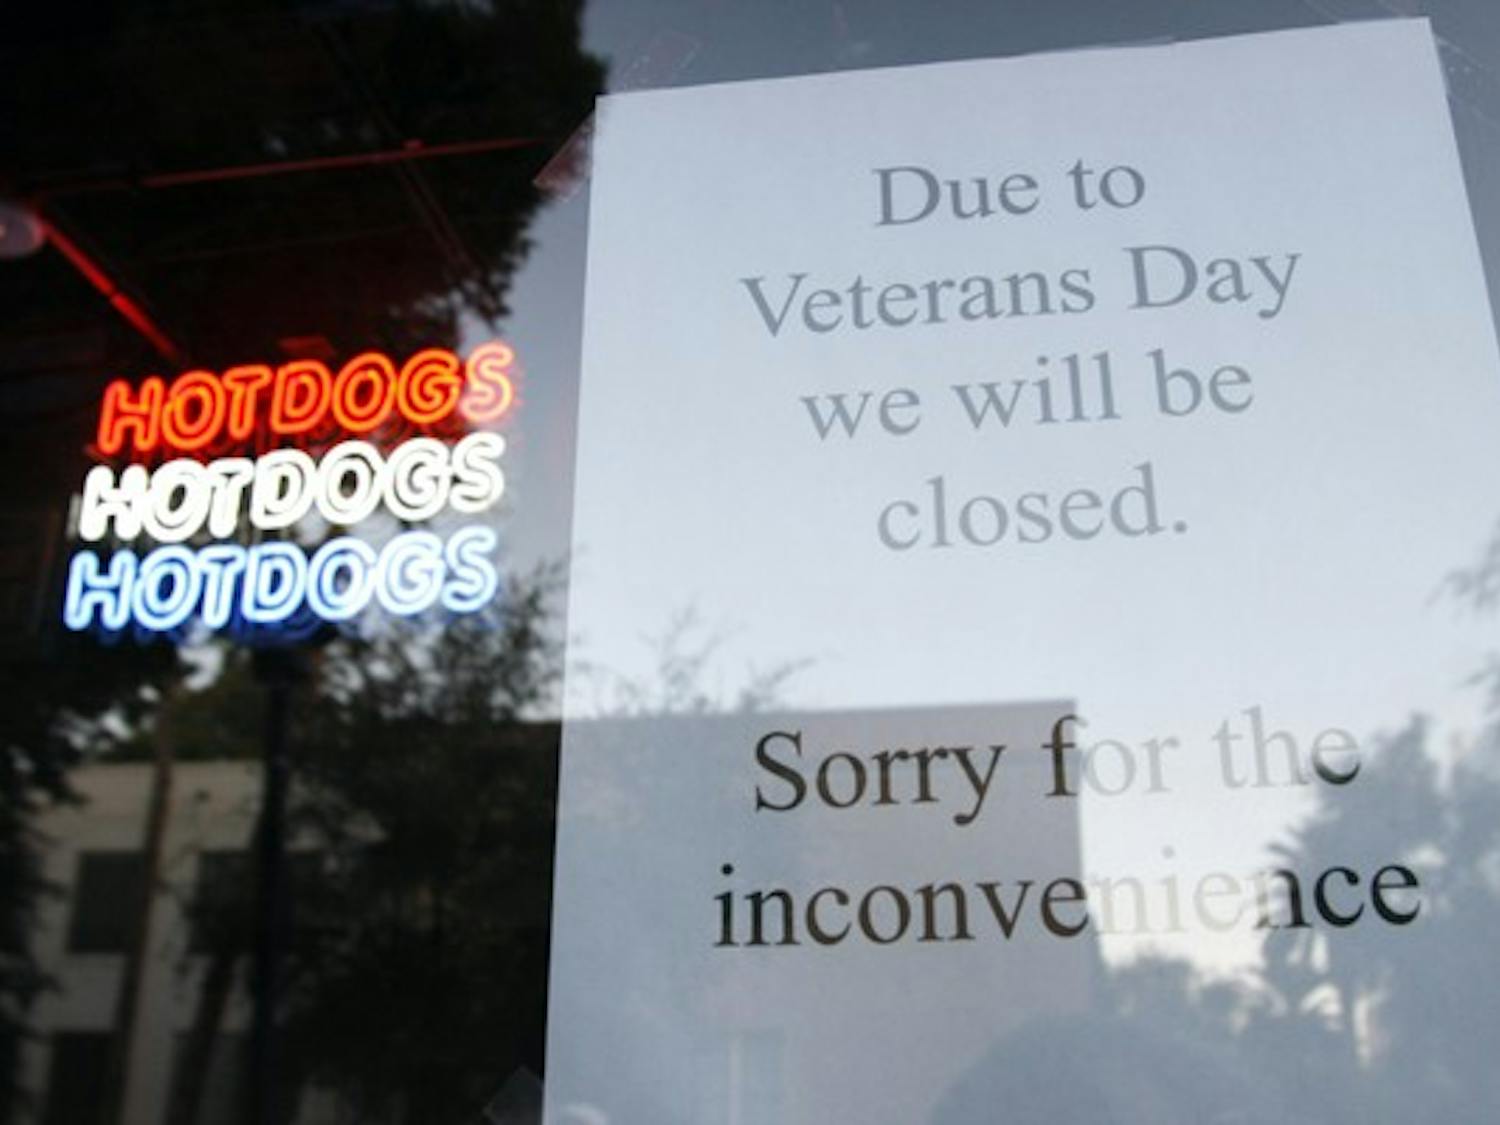 HUNGER PANGS: Dave's Dog House was closed for business on Thursday to honor those who served in our armed forces this Veterans Day. (Photo by Scott Stuk)